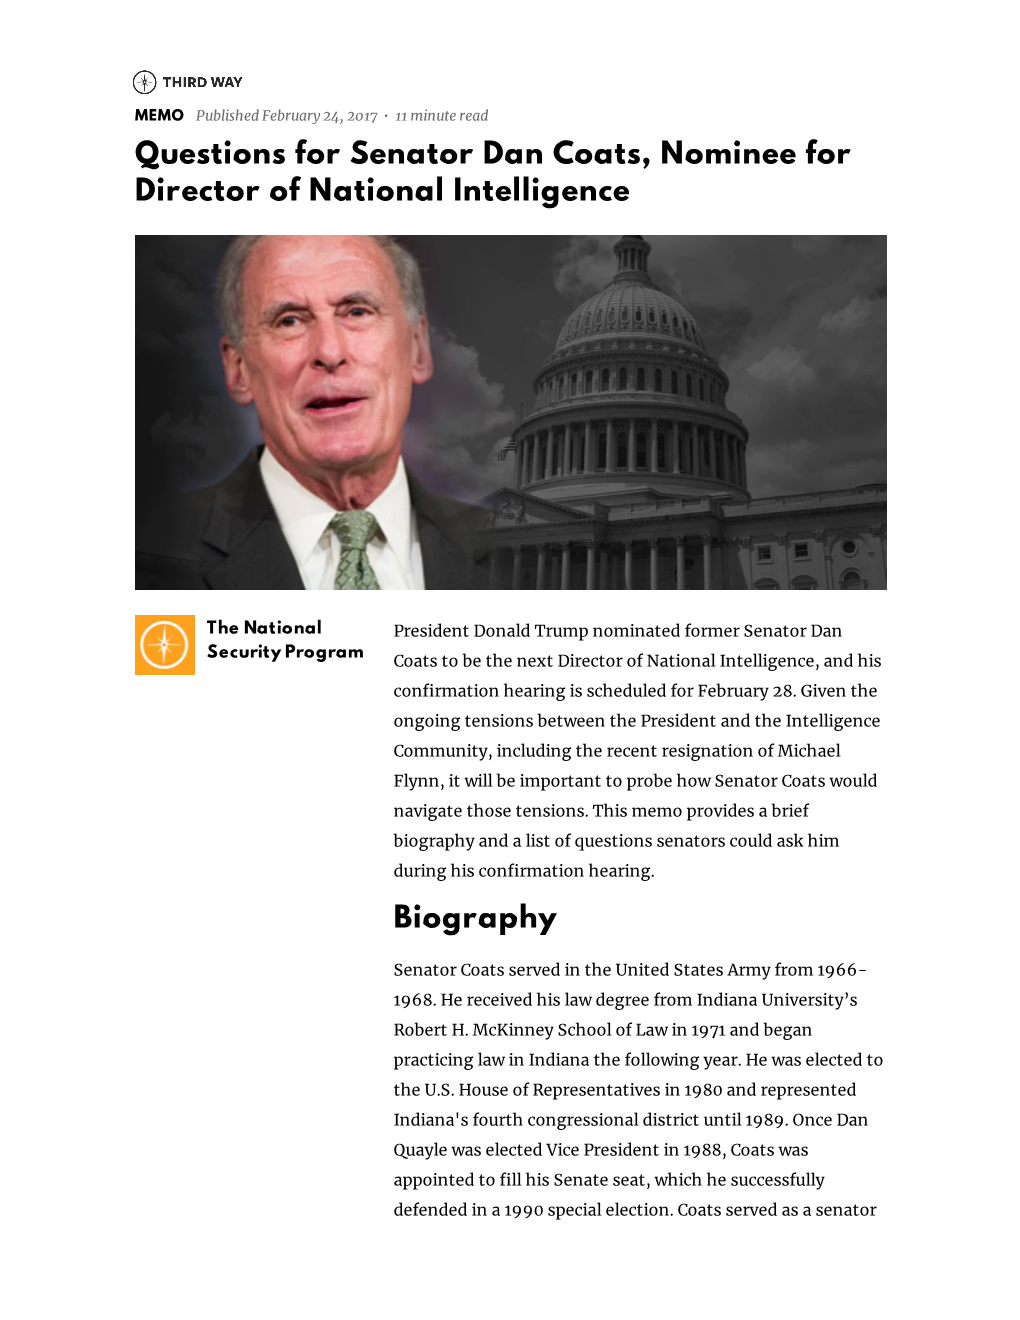 Questions for Senator Dan Coats, Nominee for Director of National Intelligence